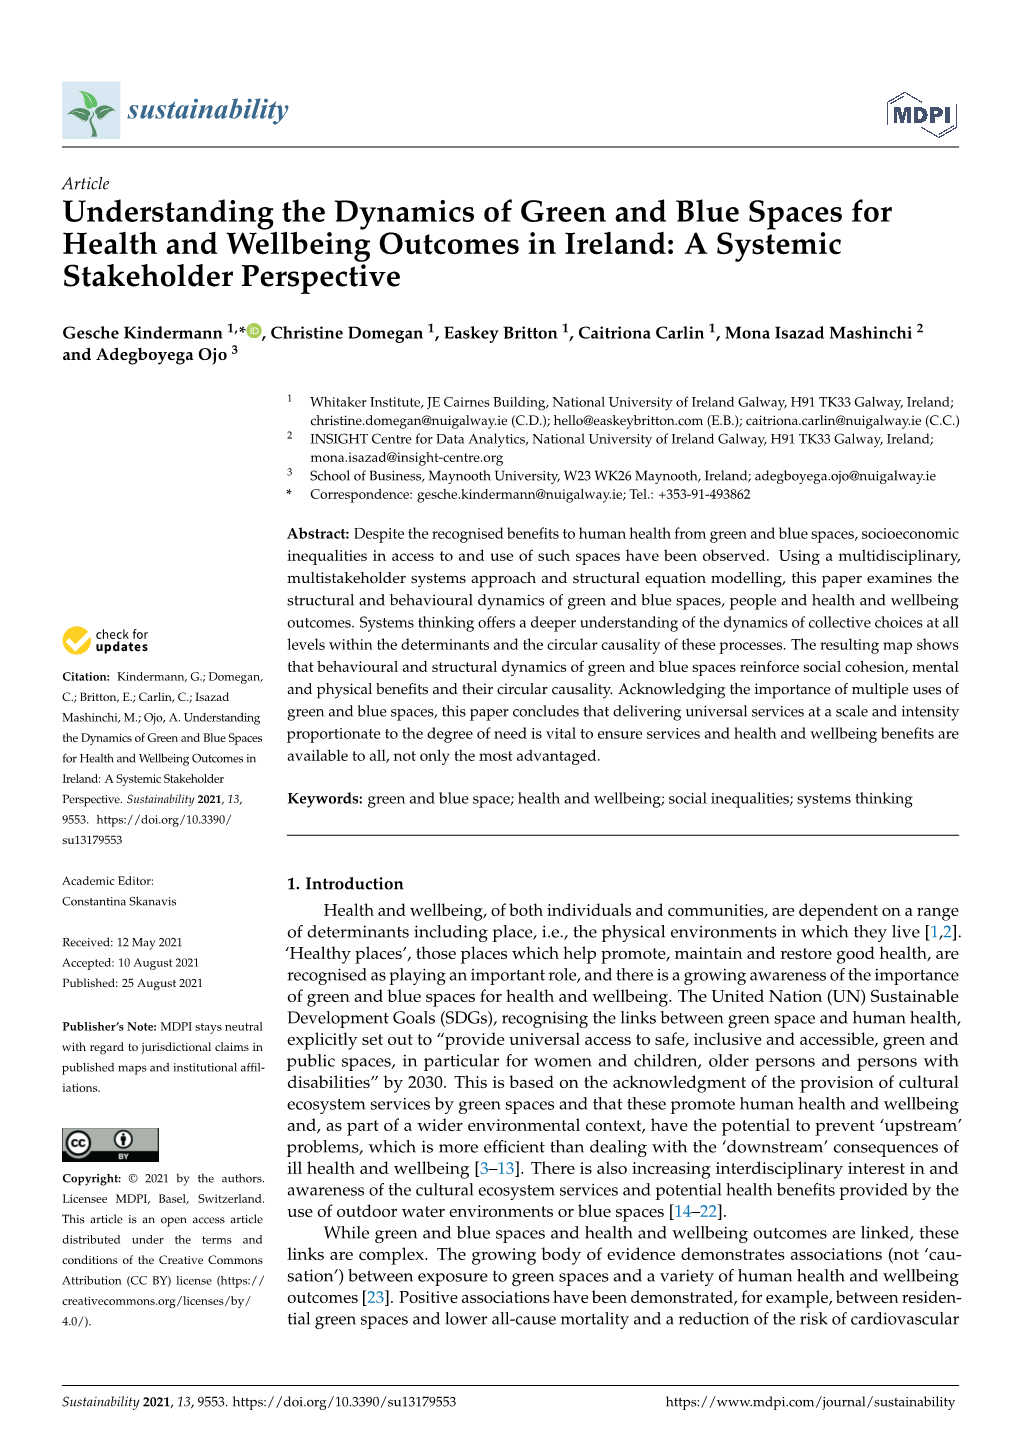 Understanding the Dynamics of Green and Blue Spaces for Health and Wellbeing Outcomes in Ireland: a Systemic Stakeholder Perspective